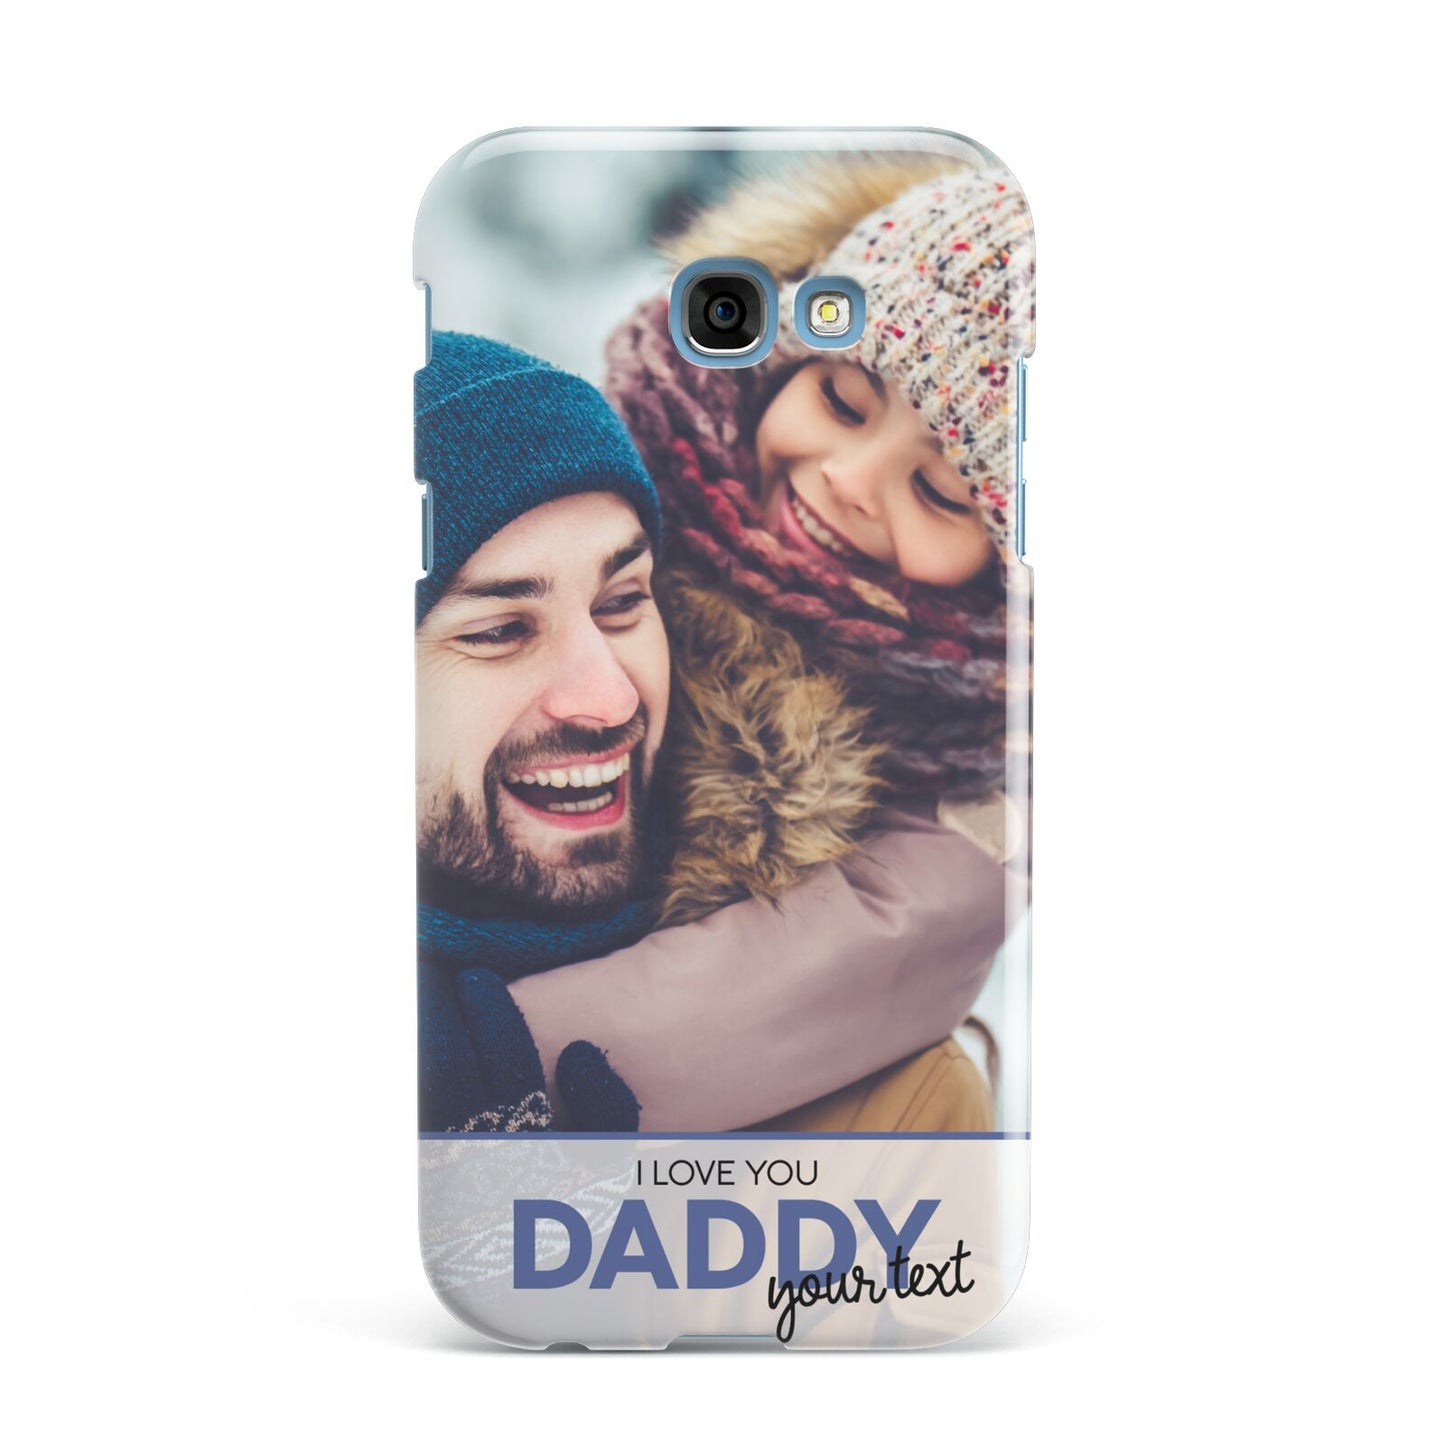 I Love You Daddy Personalised Photo Upload and Name Samsung Galaxy A7 2017 Case